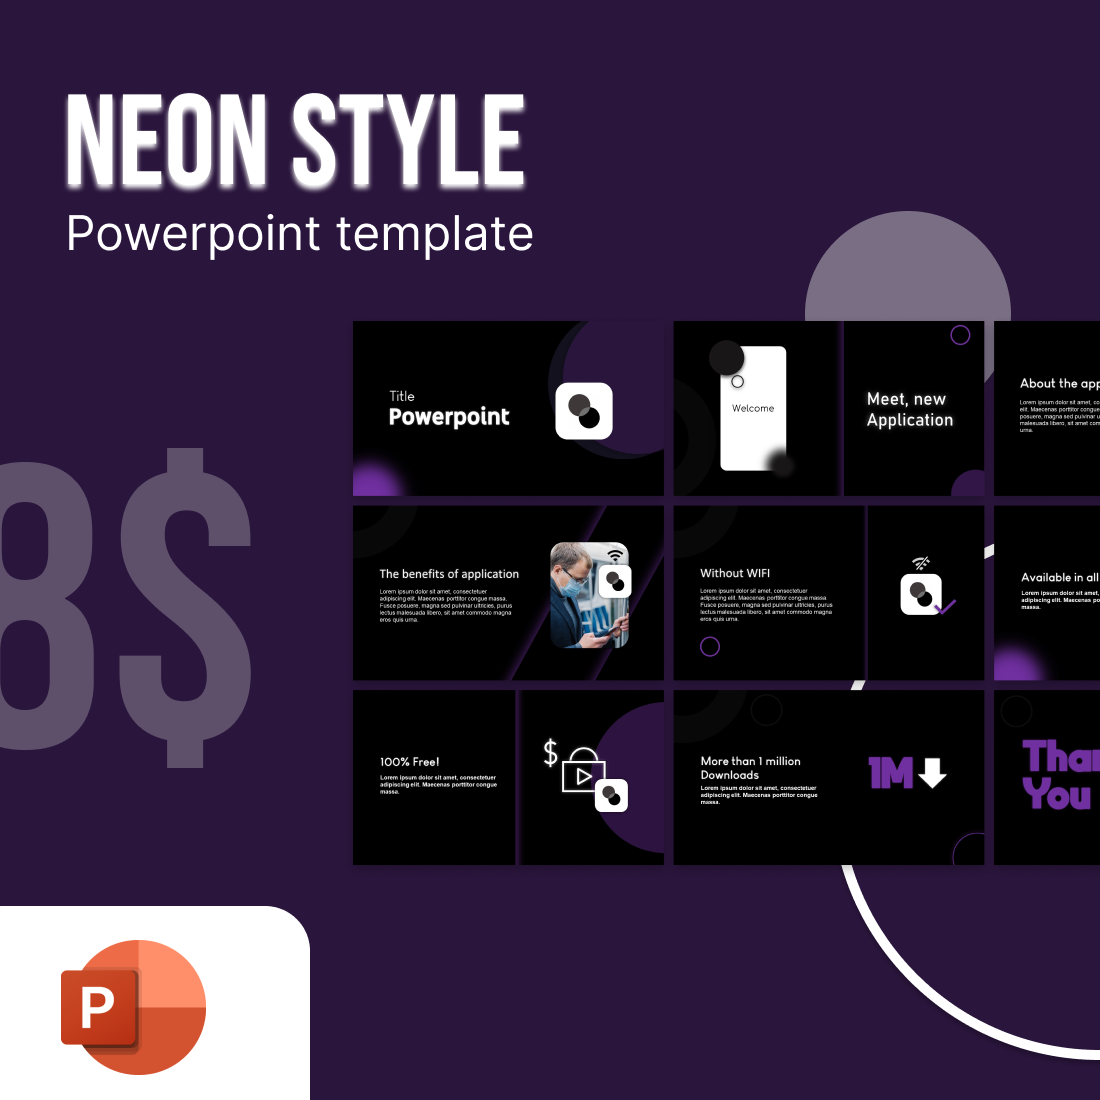 Powerpoint template Neon style cover image.